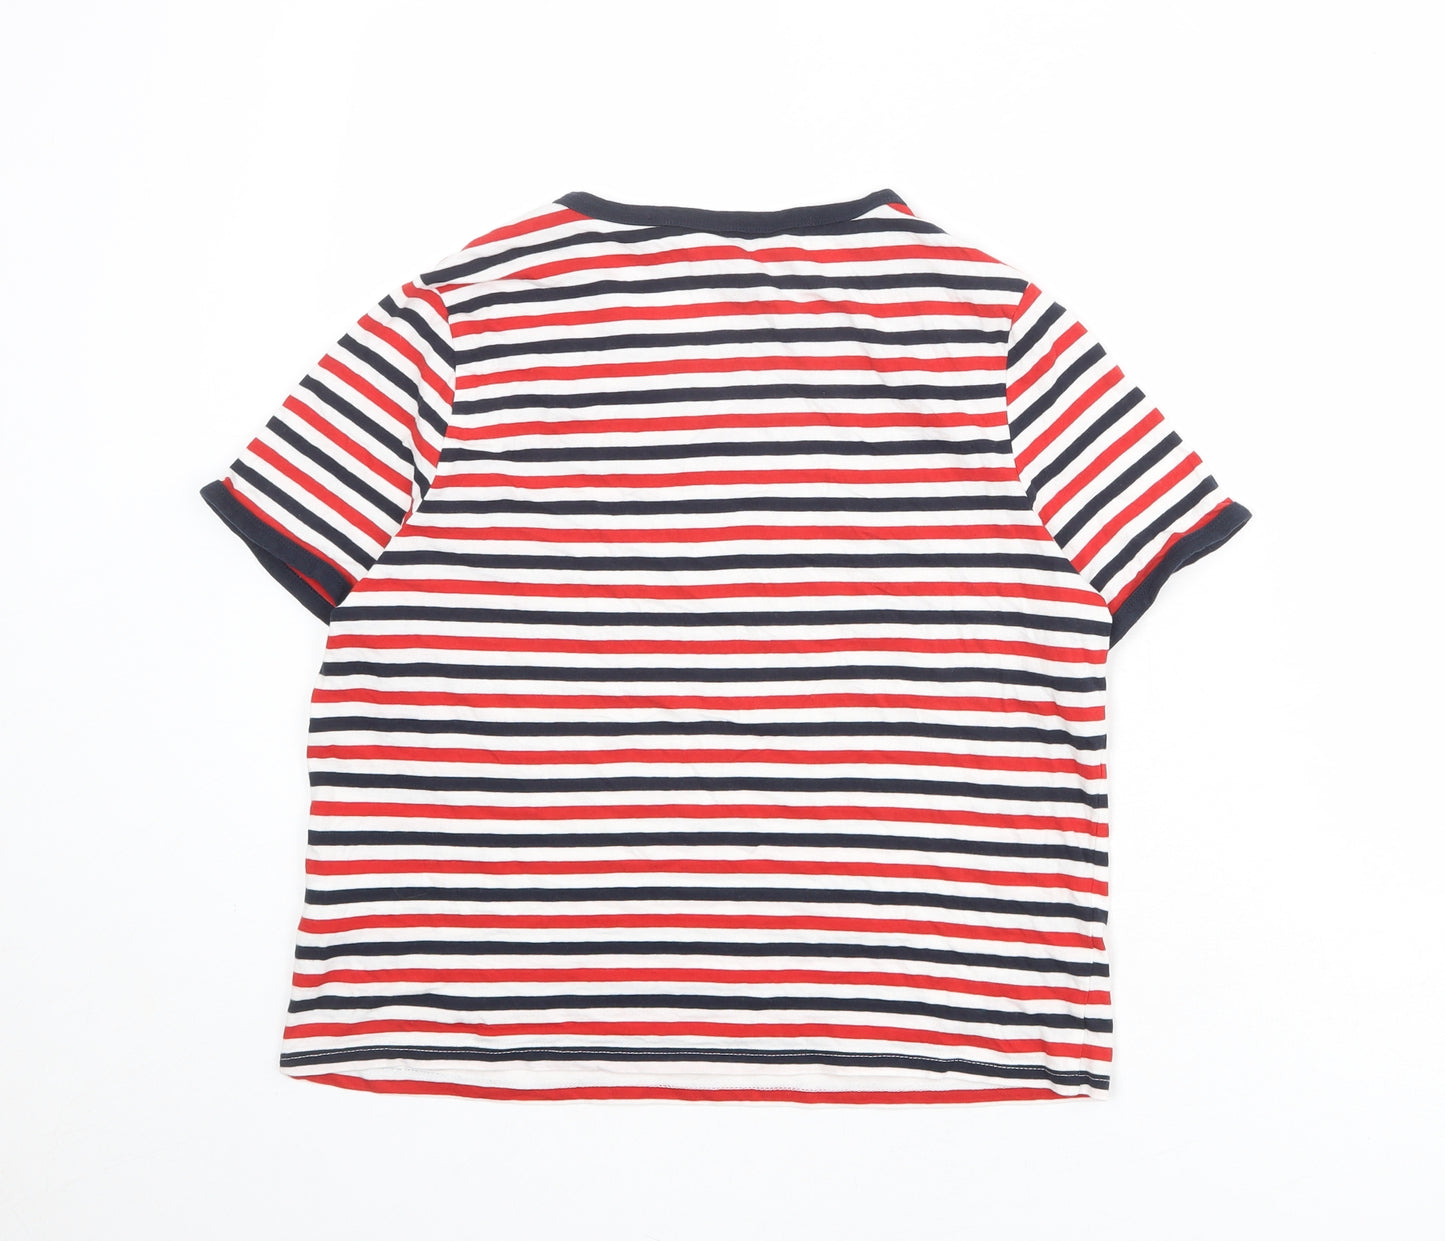 New Look Womens Multicoloured Striped Cotton Basic T-Shirt Size 12 Round Neck